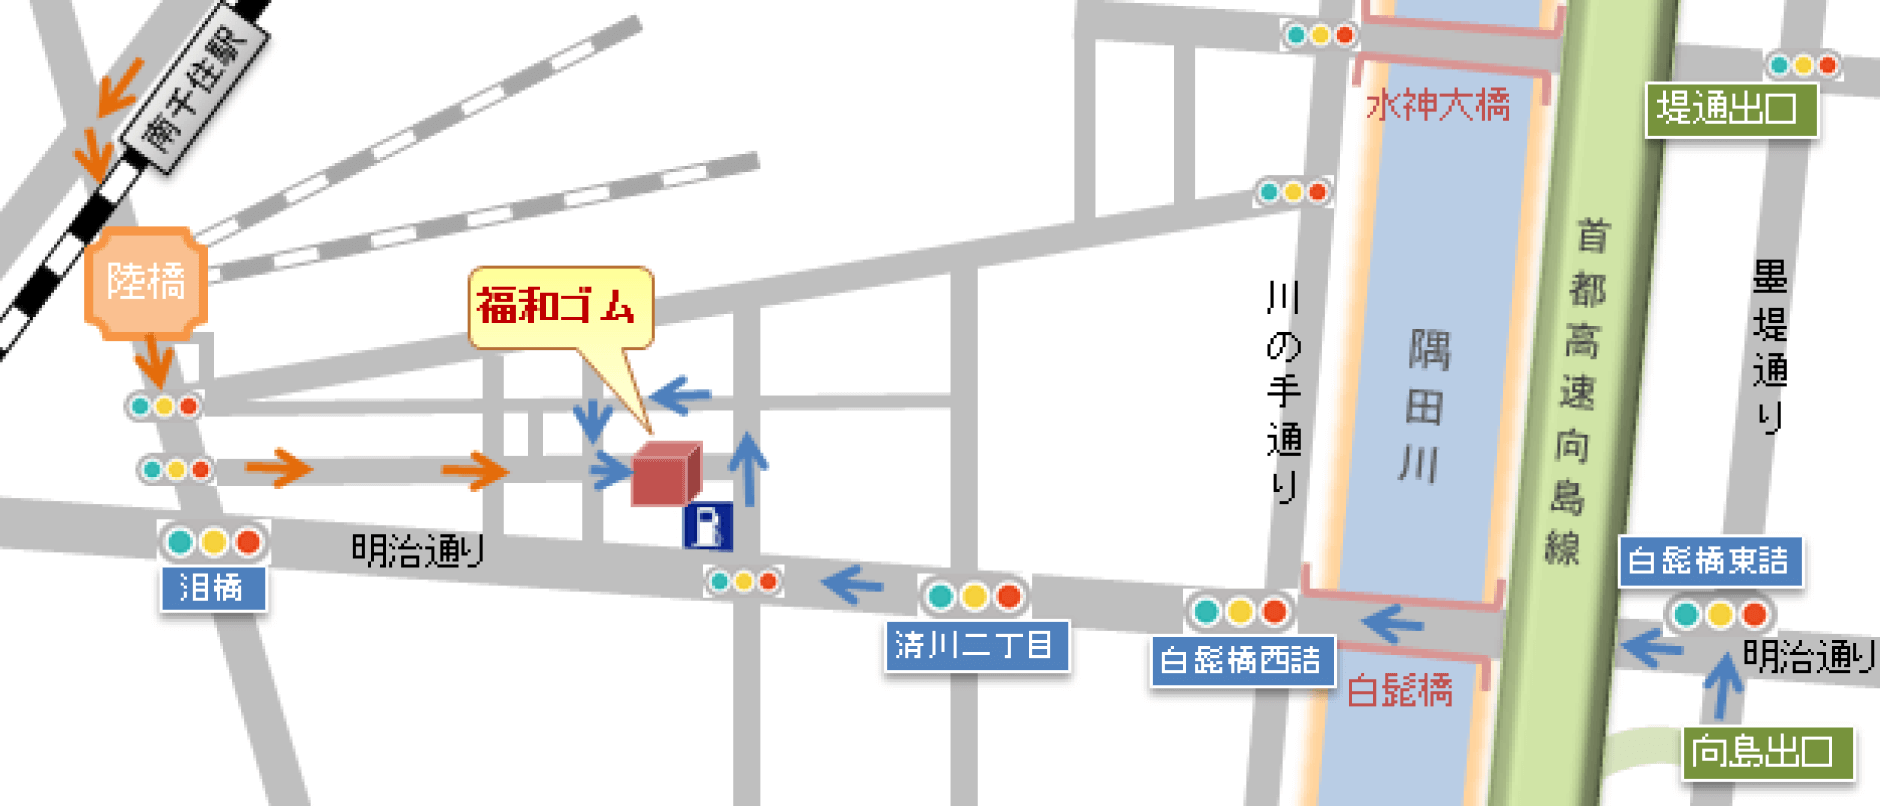 access_map_image